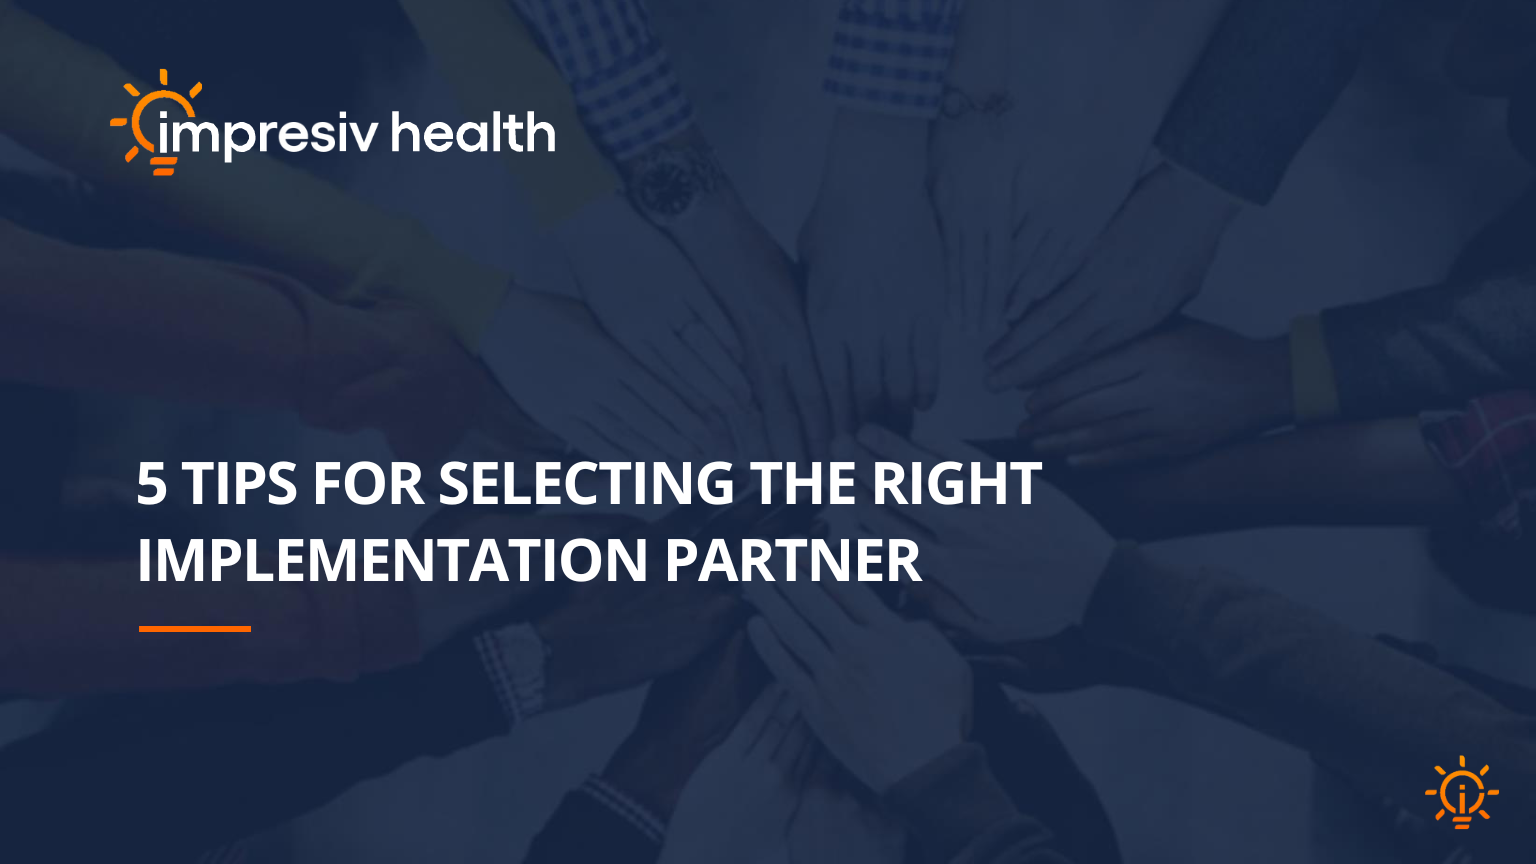 5 Tips for Selecting the Right Implementation Partner